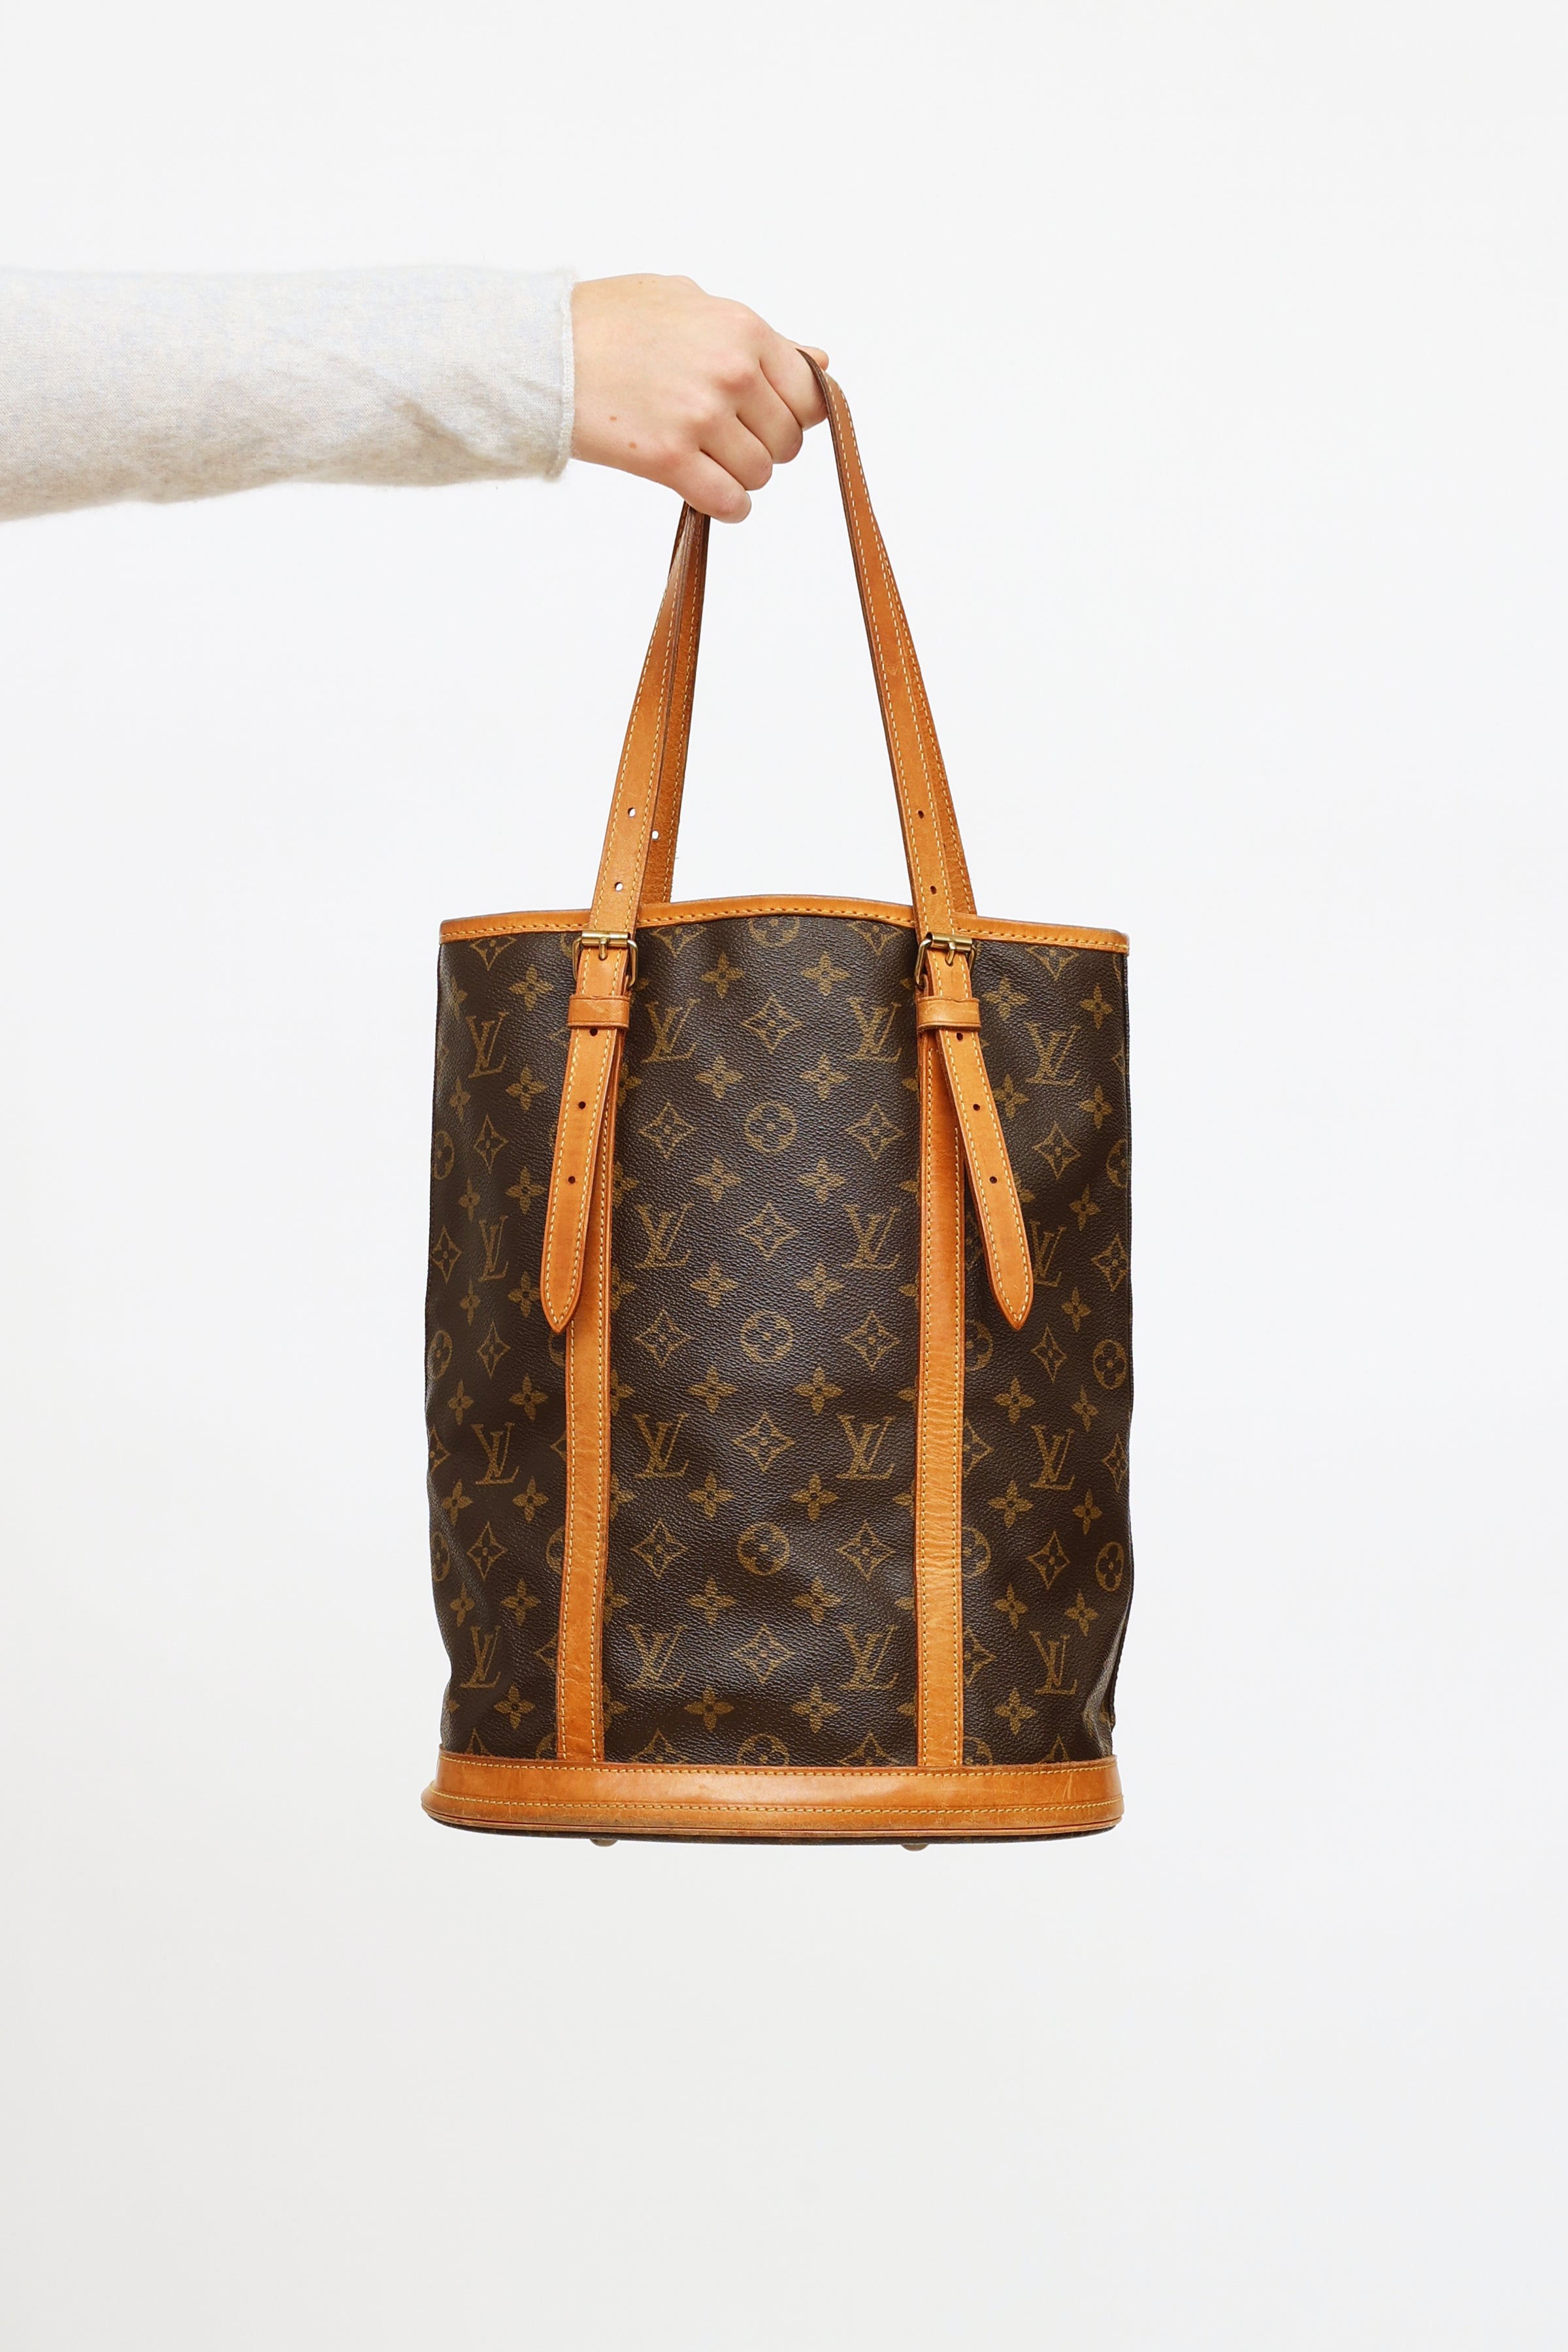 Advice: Canvas or leather? : r/Louisvuitton